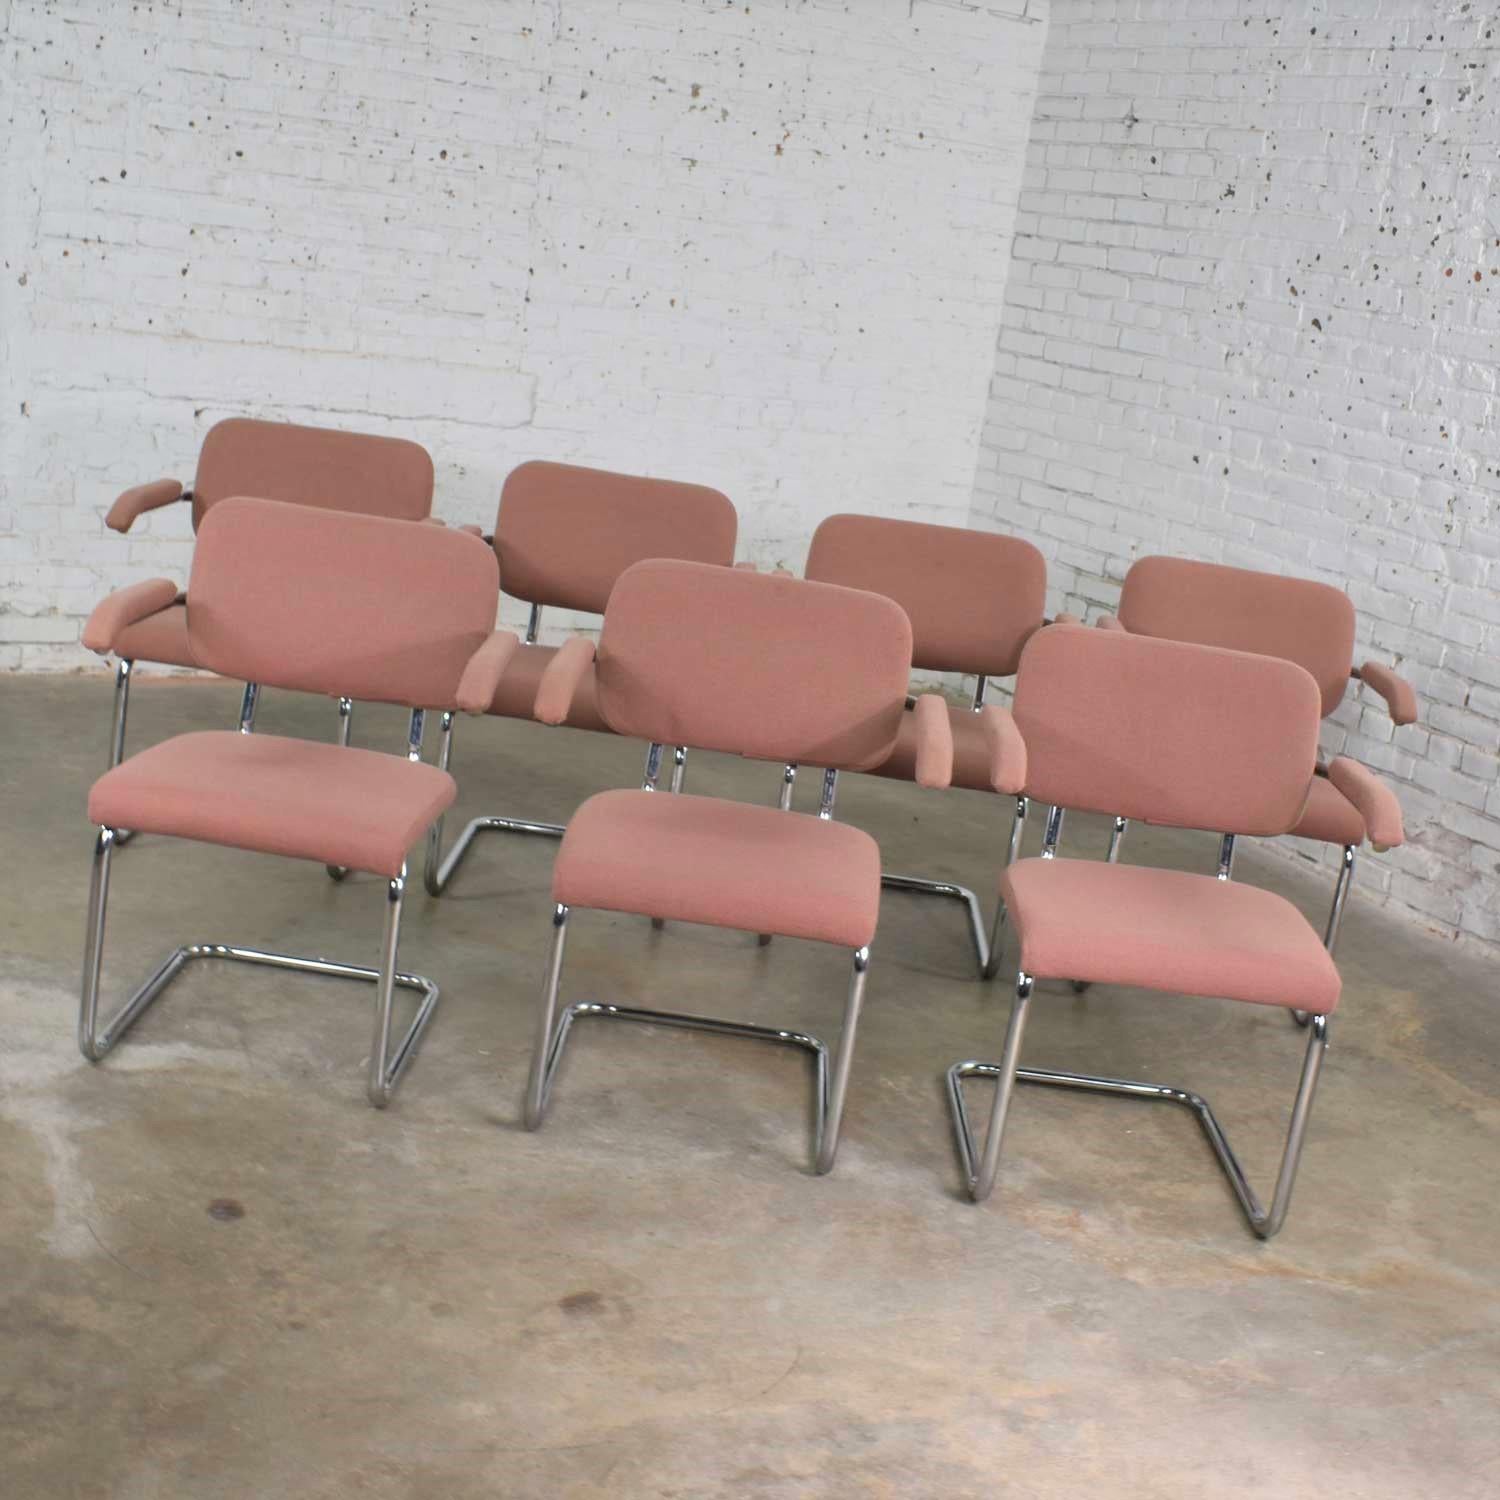 Awesome set of 7 cantilevered tubular chrome and mauve tweed-like fabric upholstered dining chairs in the style of the Cesca chair designed by Marcel Breuer in 1928. This set is made by Virco Manufacturing Company. All seven chairs are in wonderful